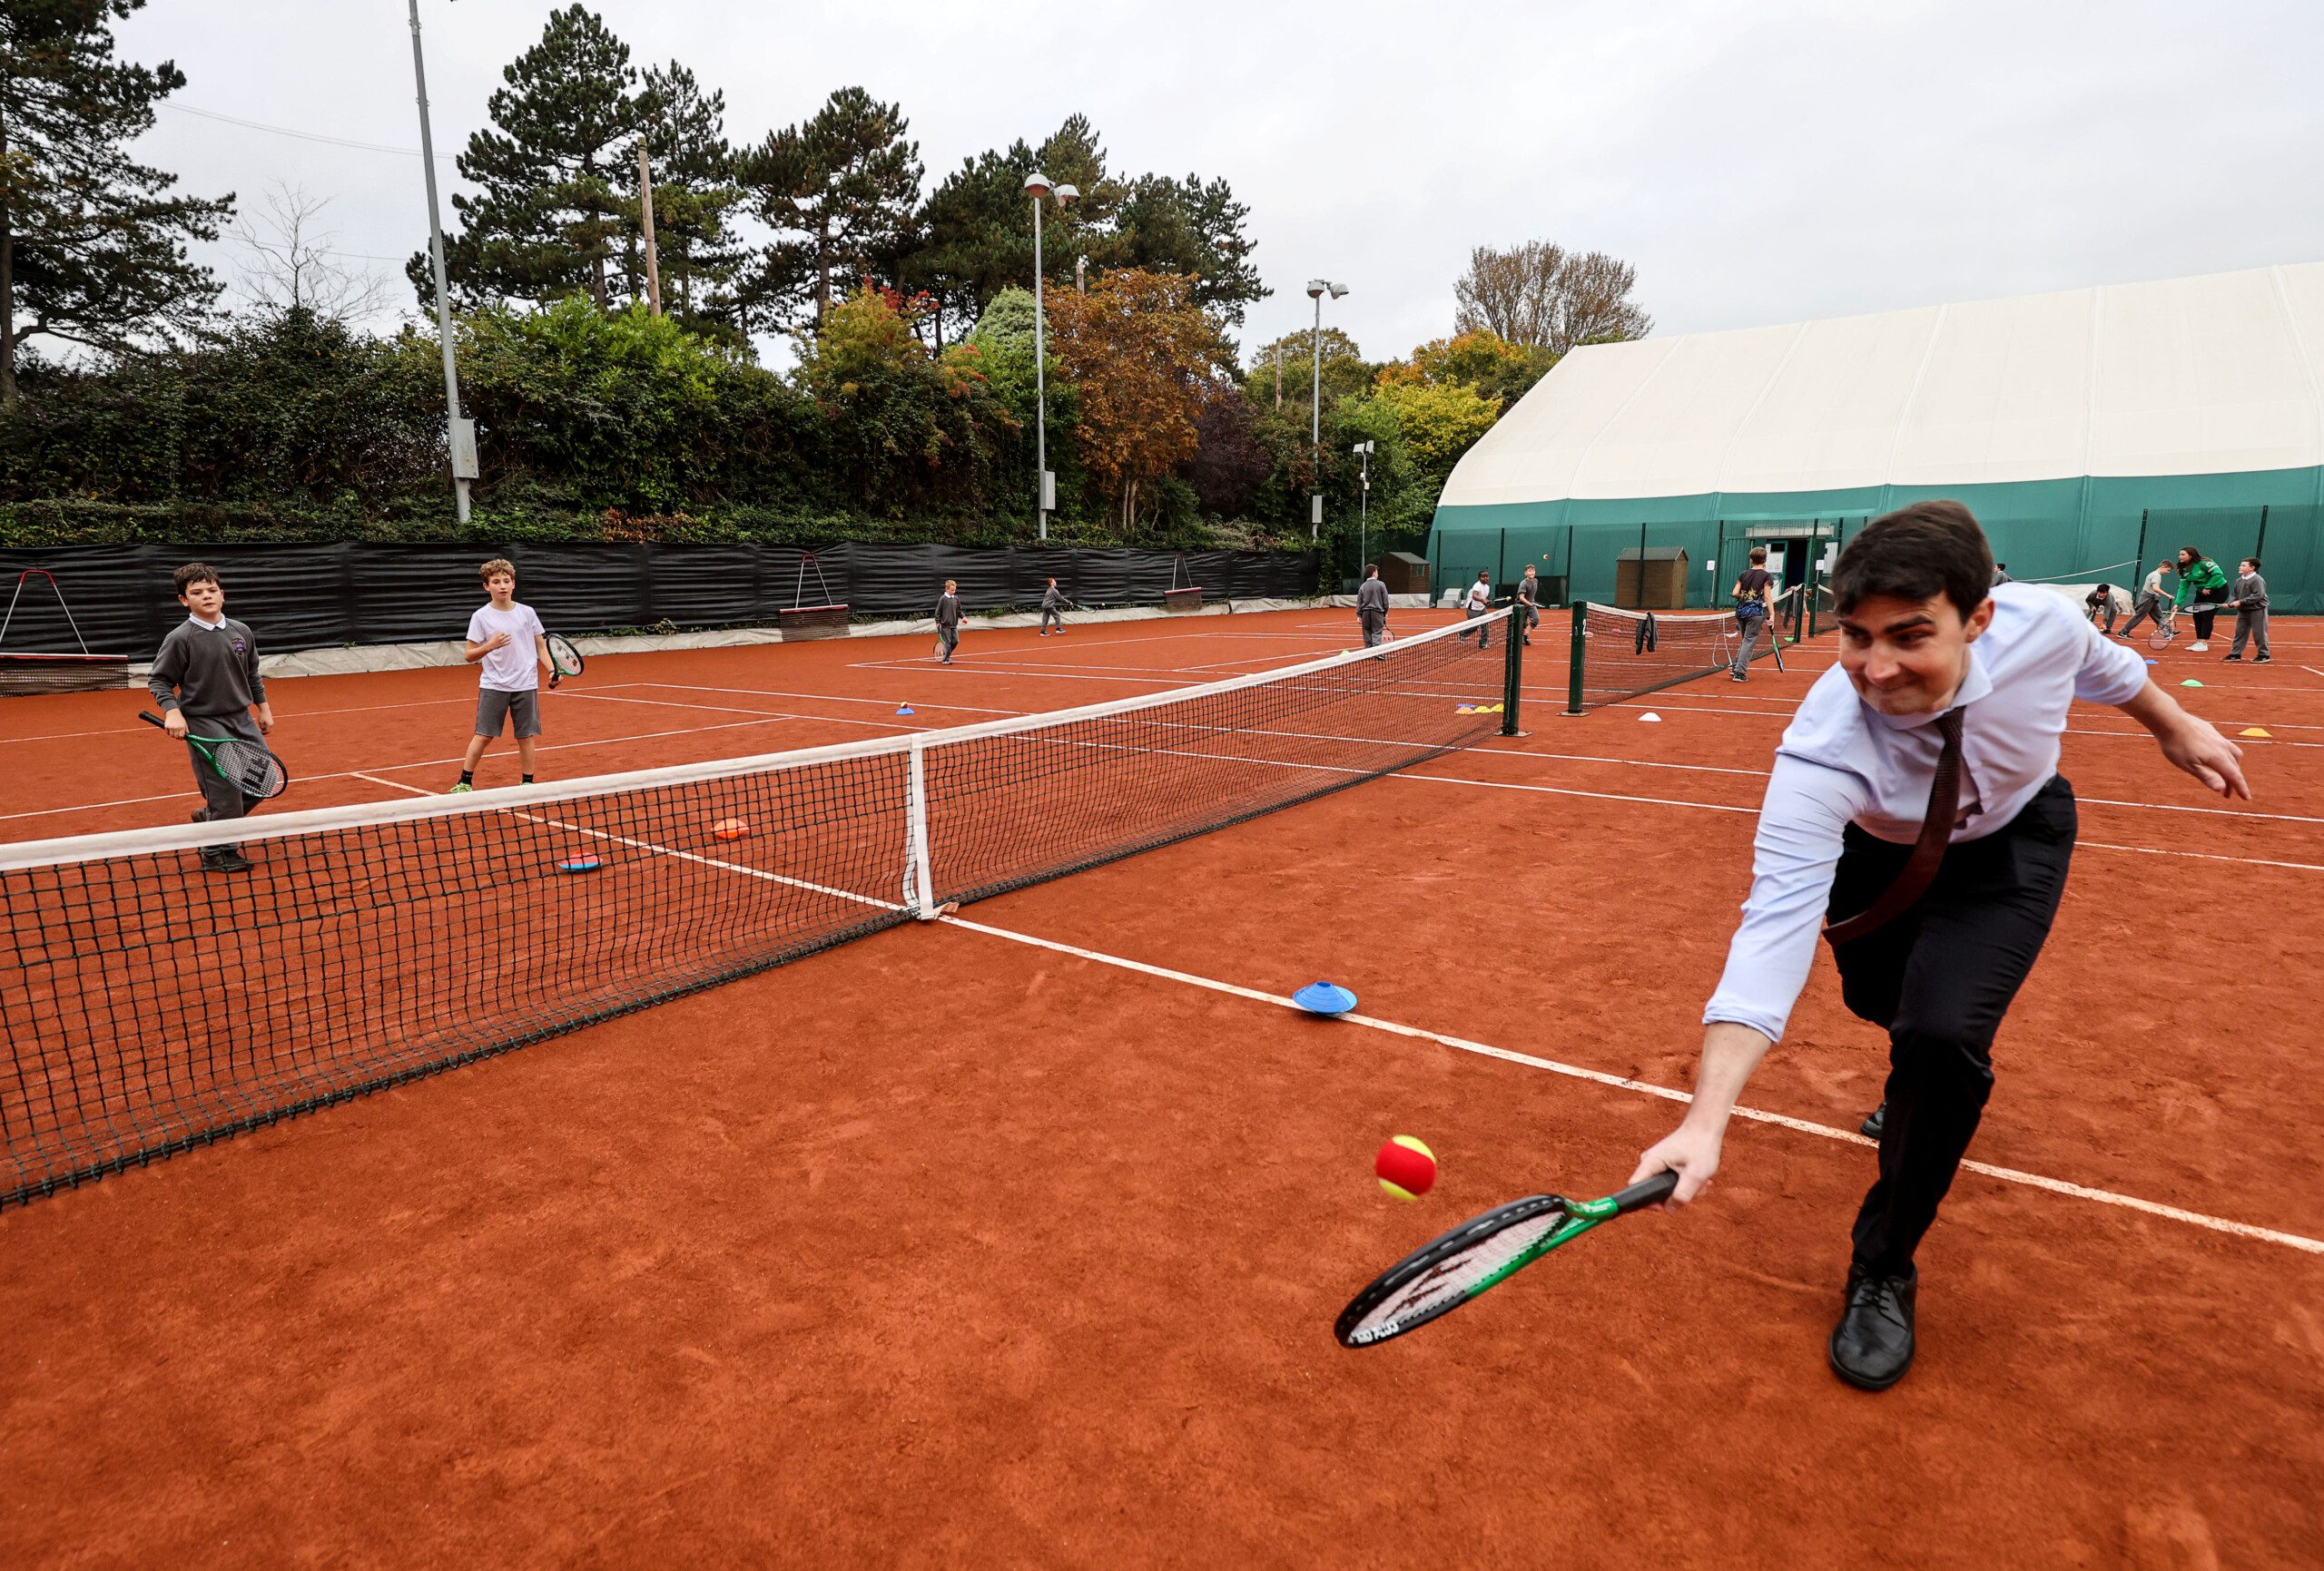 Three New Red Plus Clay Tennis Courts Unveiled At National Tennis Centre In Dublin